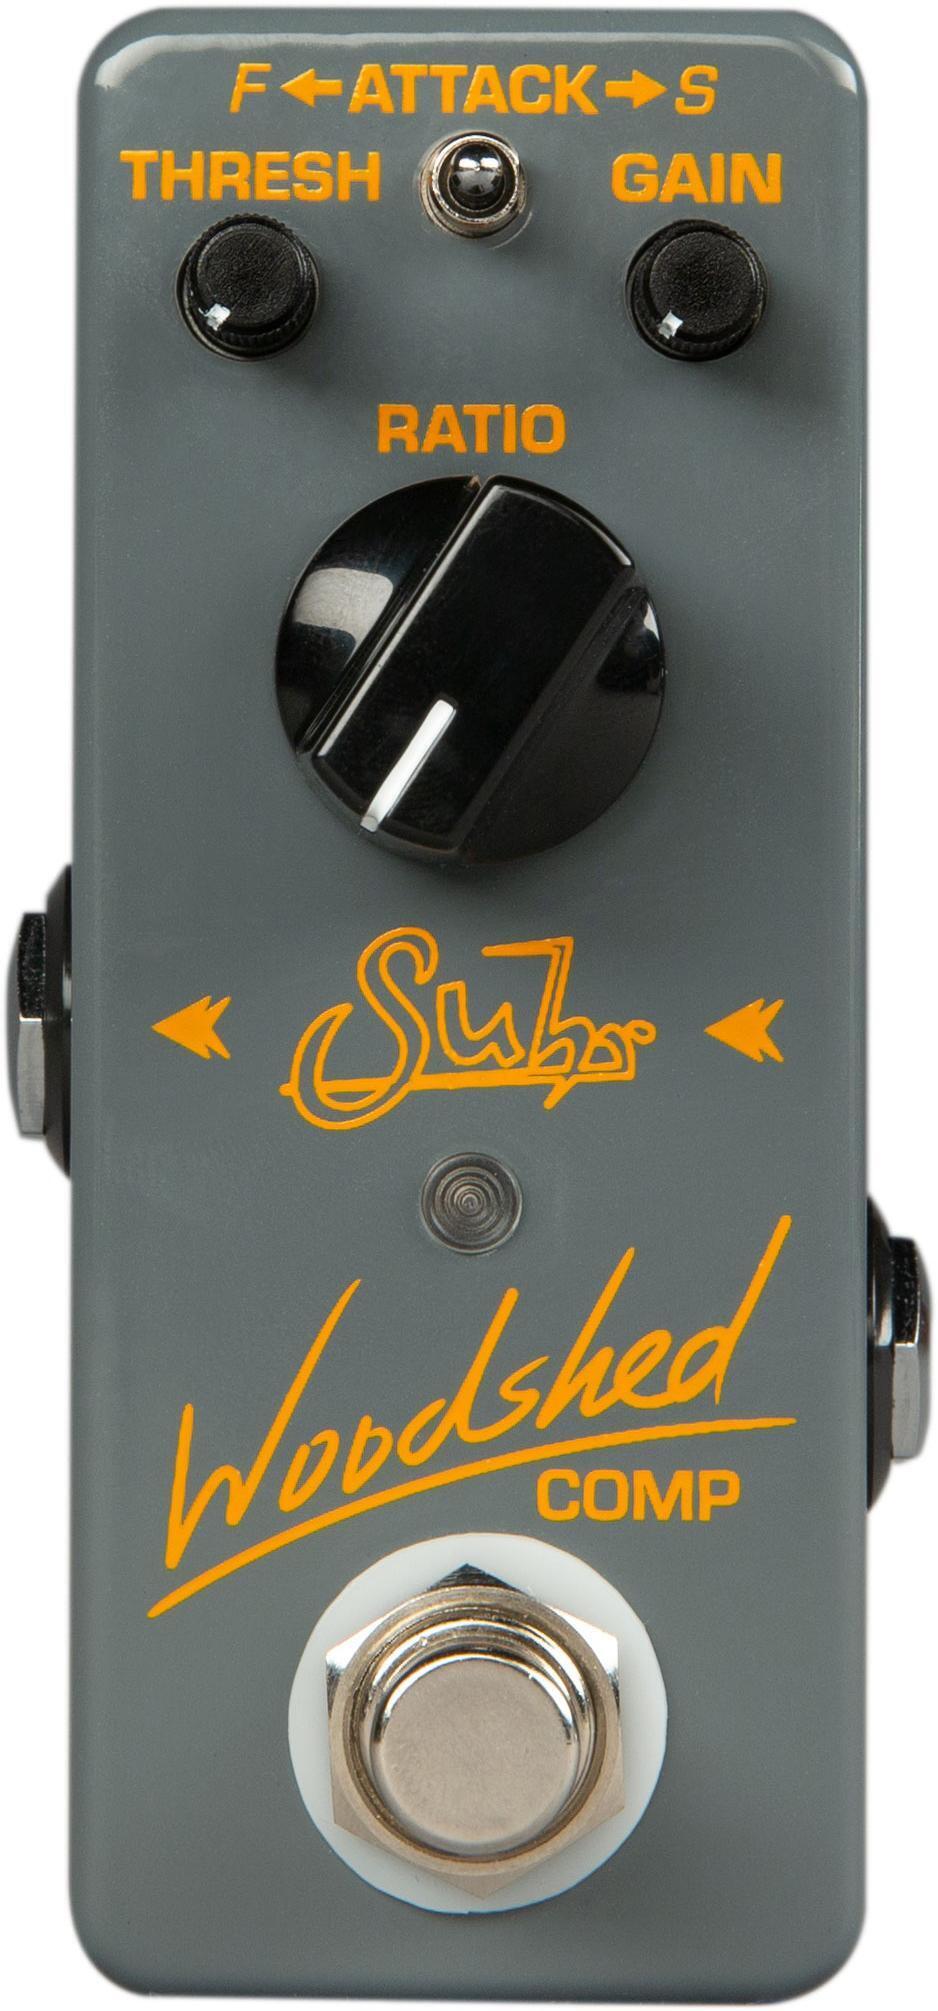 Suhr Andy Wood Signature Woodshed Comp Compressor Pedal